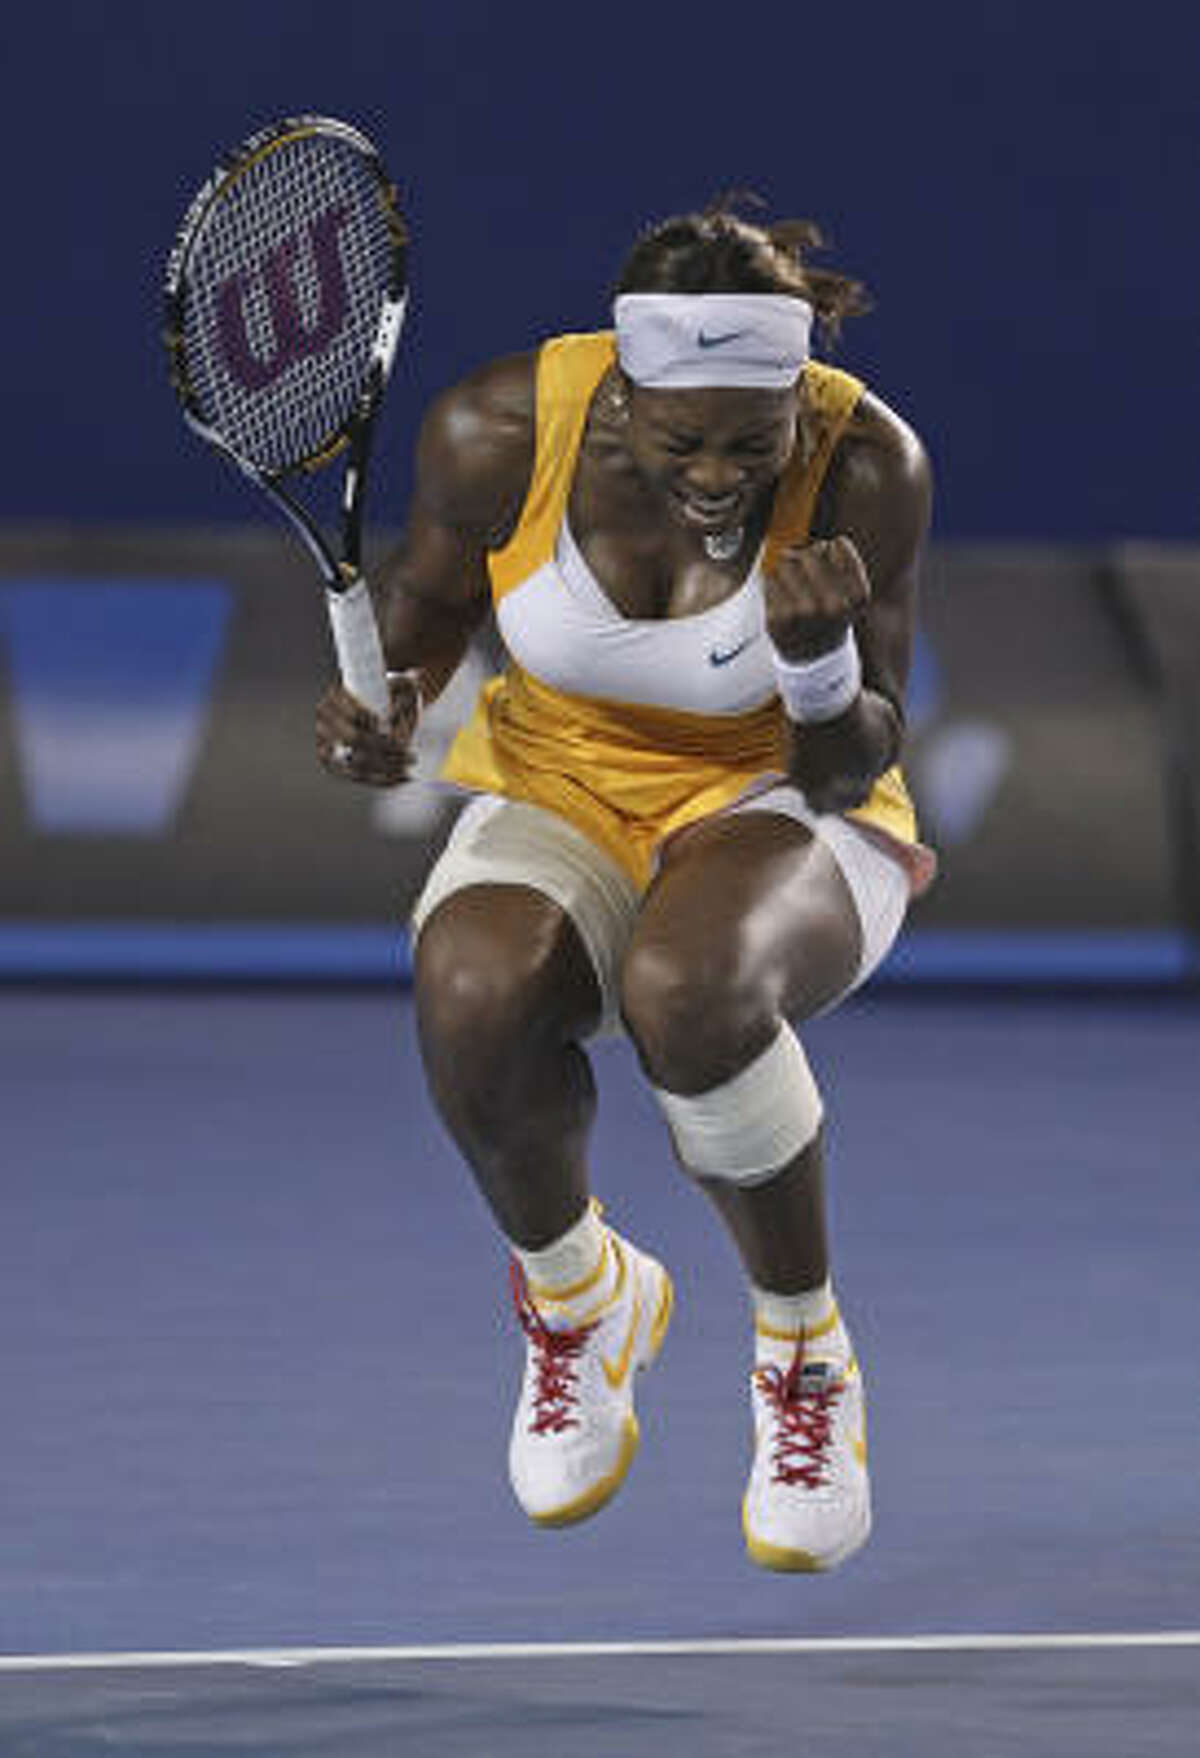 Serena Williams reacts after winning her second straight Australian Open championship 6-4, 3-6, 6-2 over Justine Henin.